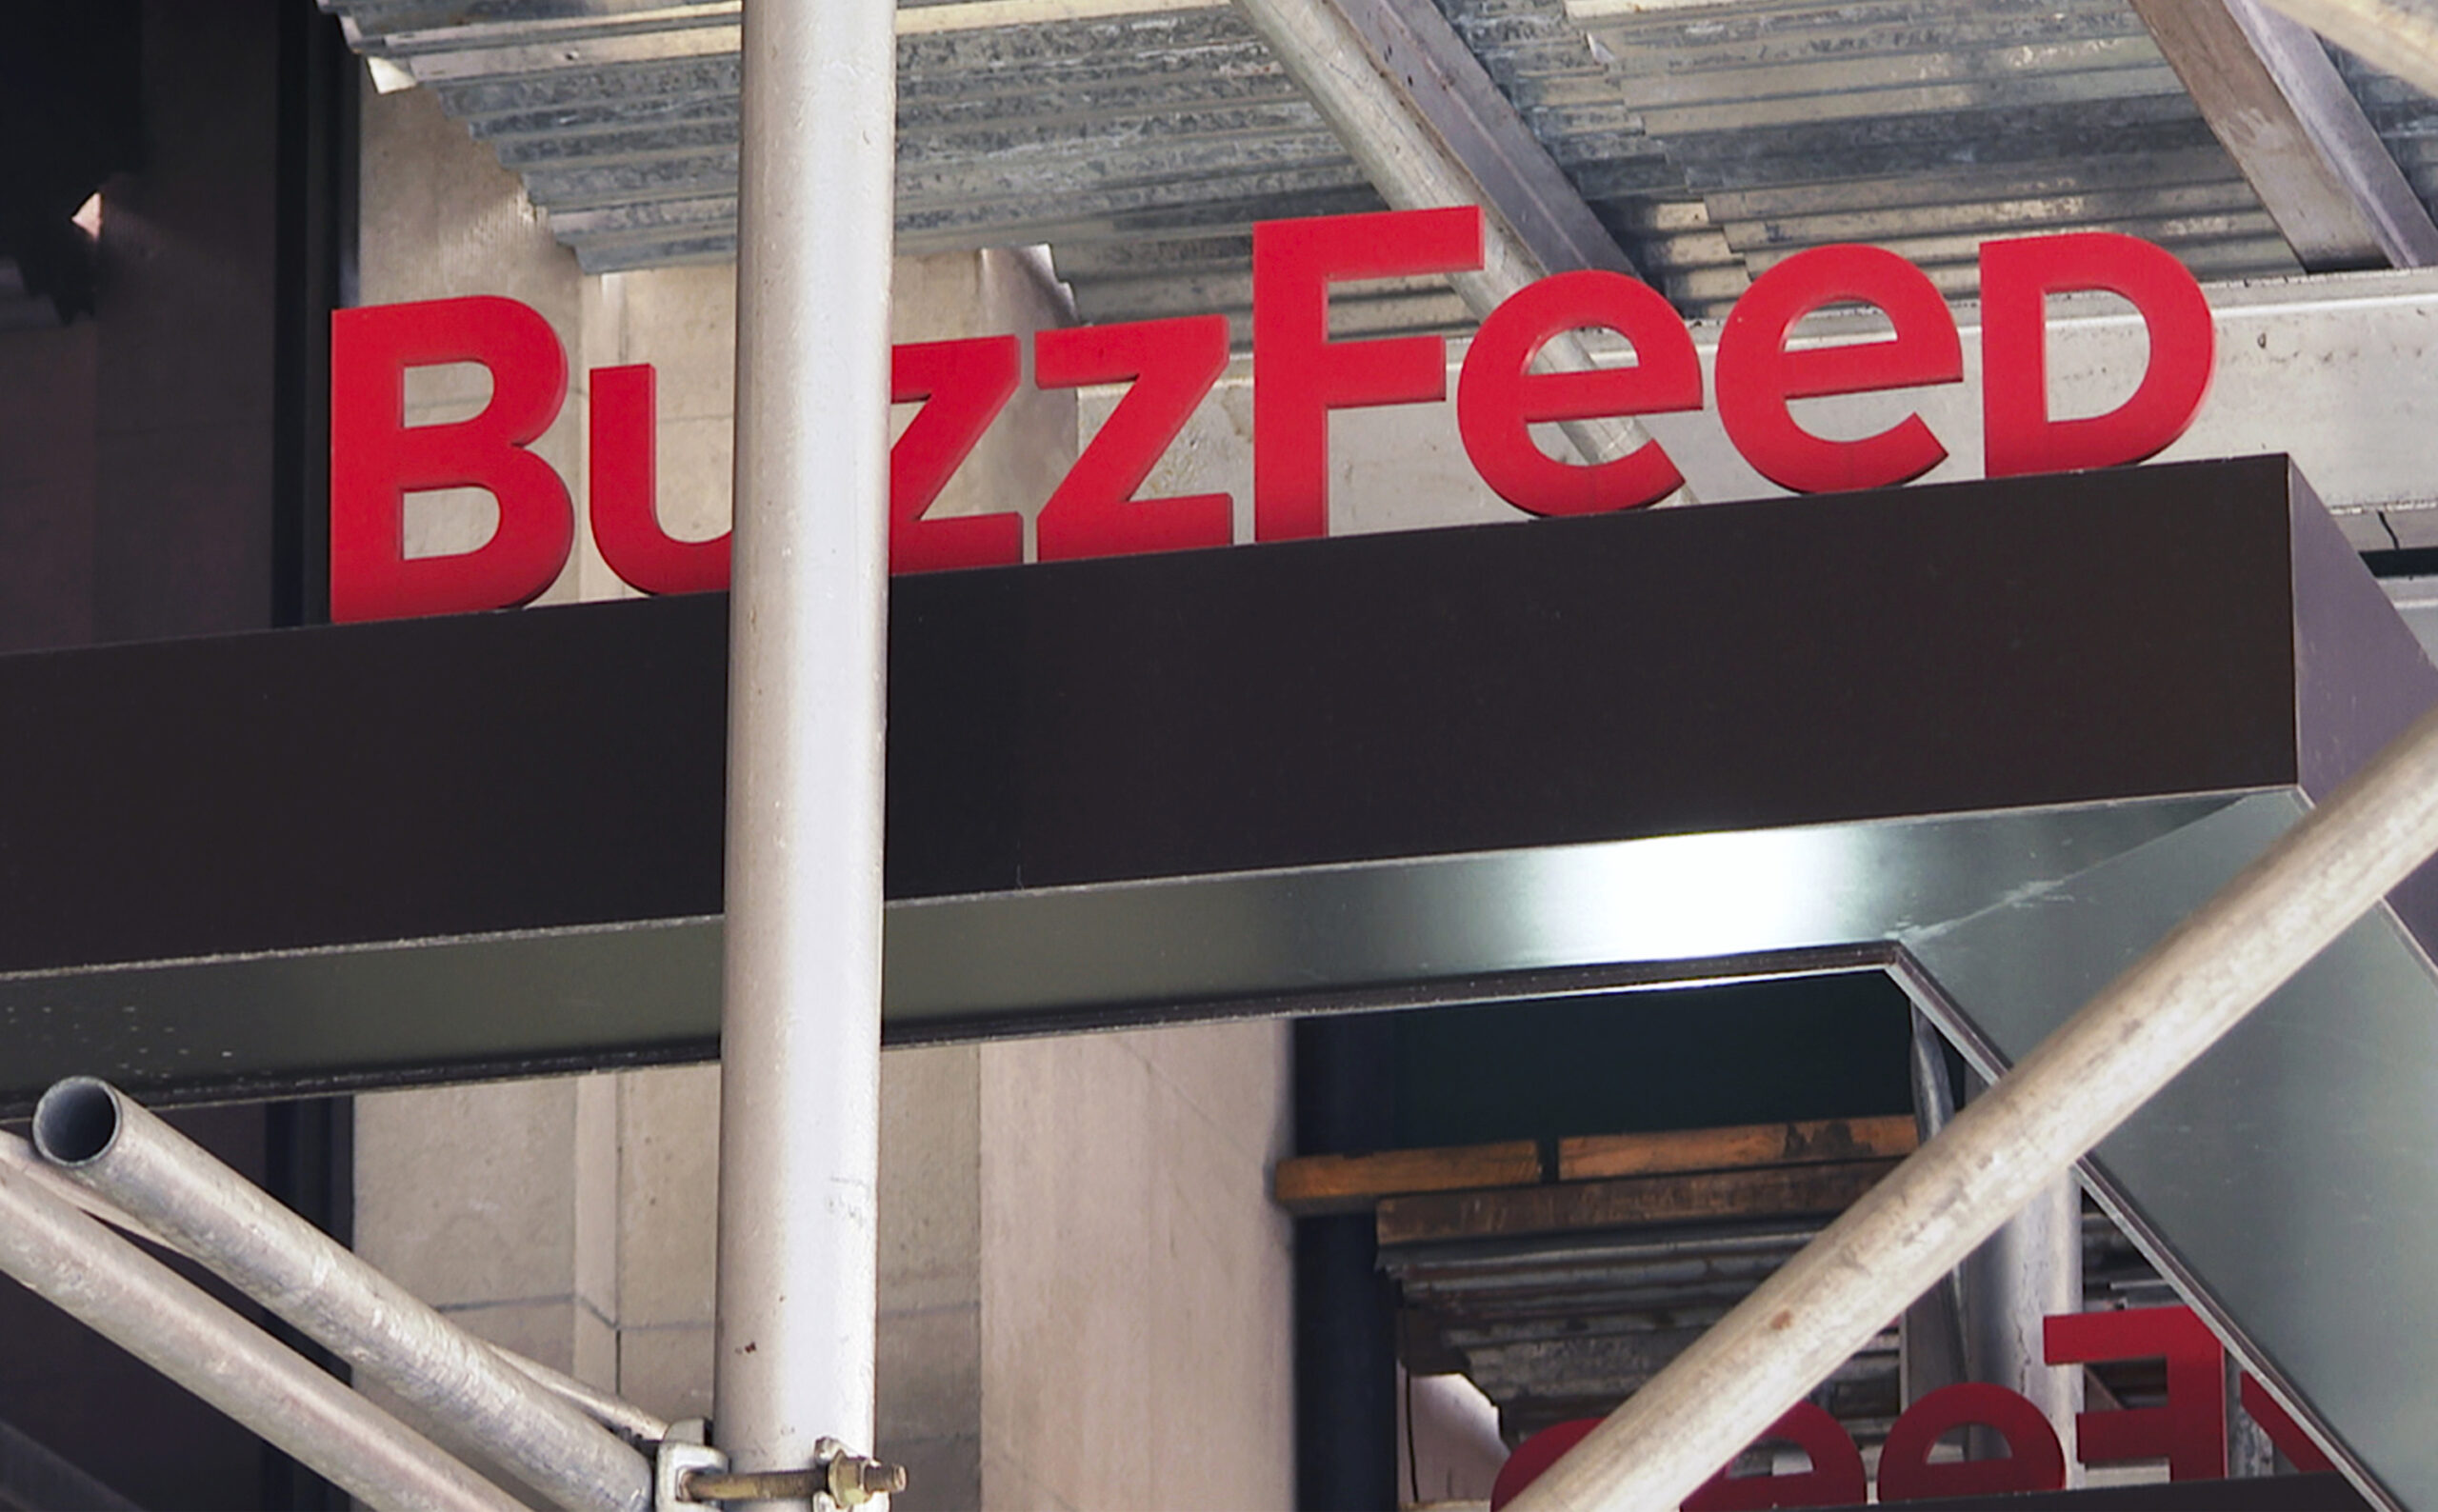 In April, Buzzfeed announced that it was shutting down its Pulitzer Prize-winning site Buzzfeed News, along with cutting 15 percent of its staff